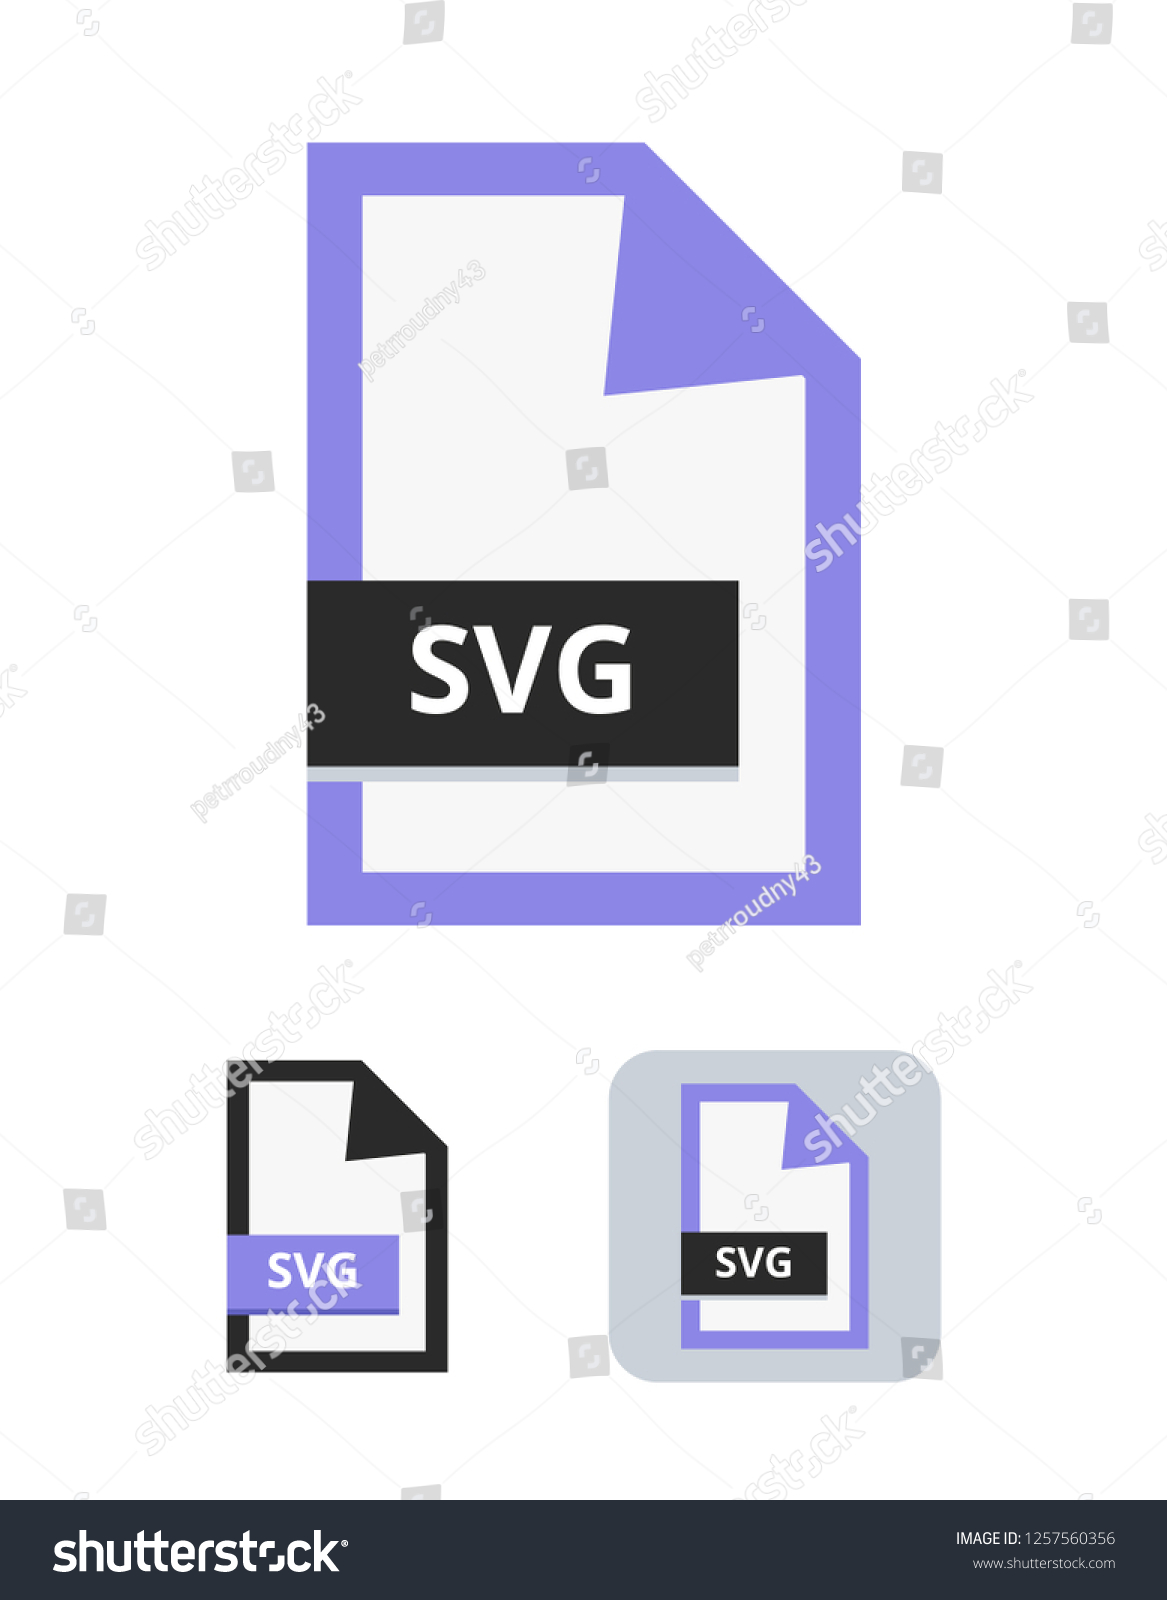 SVG of Svg file flat vector icon. Symbol of SVG XML based vector image format for web icons, interactive graphic, webdesign and animation isolated on a white background. svg